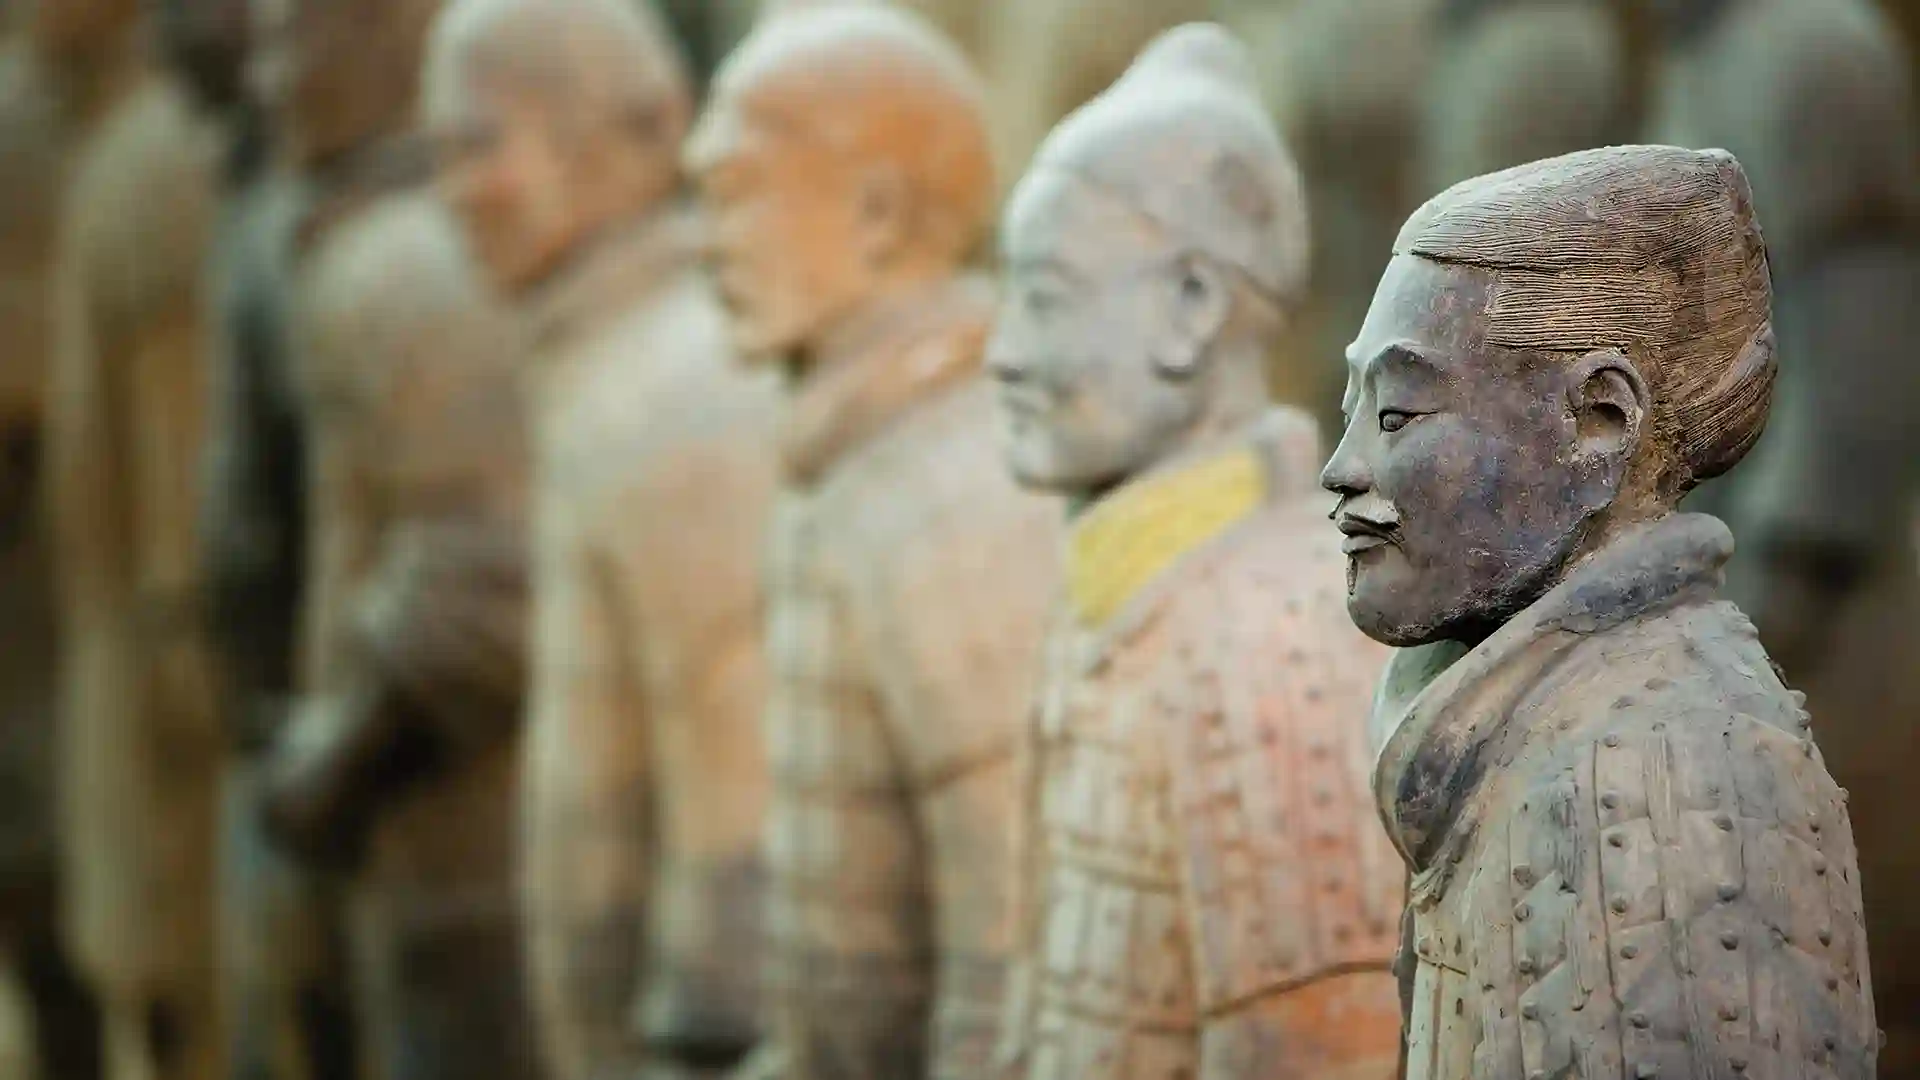 View of the terra-cotta warriors in Xi’an.